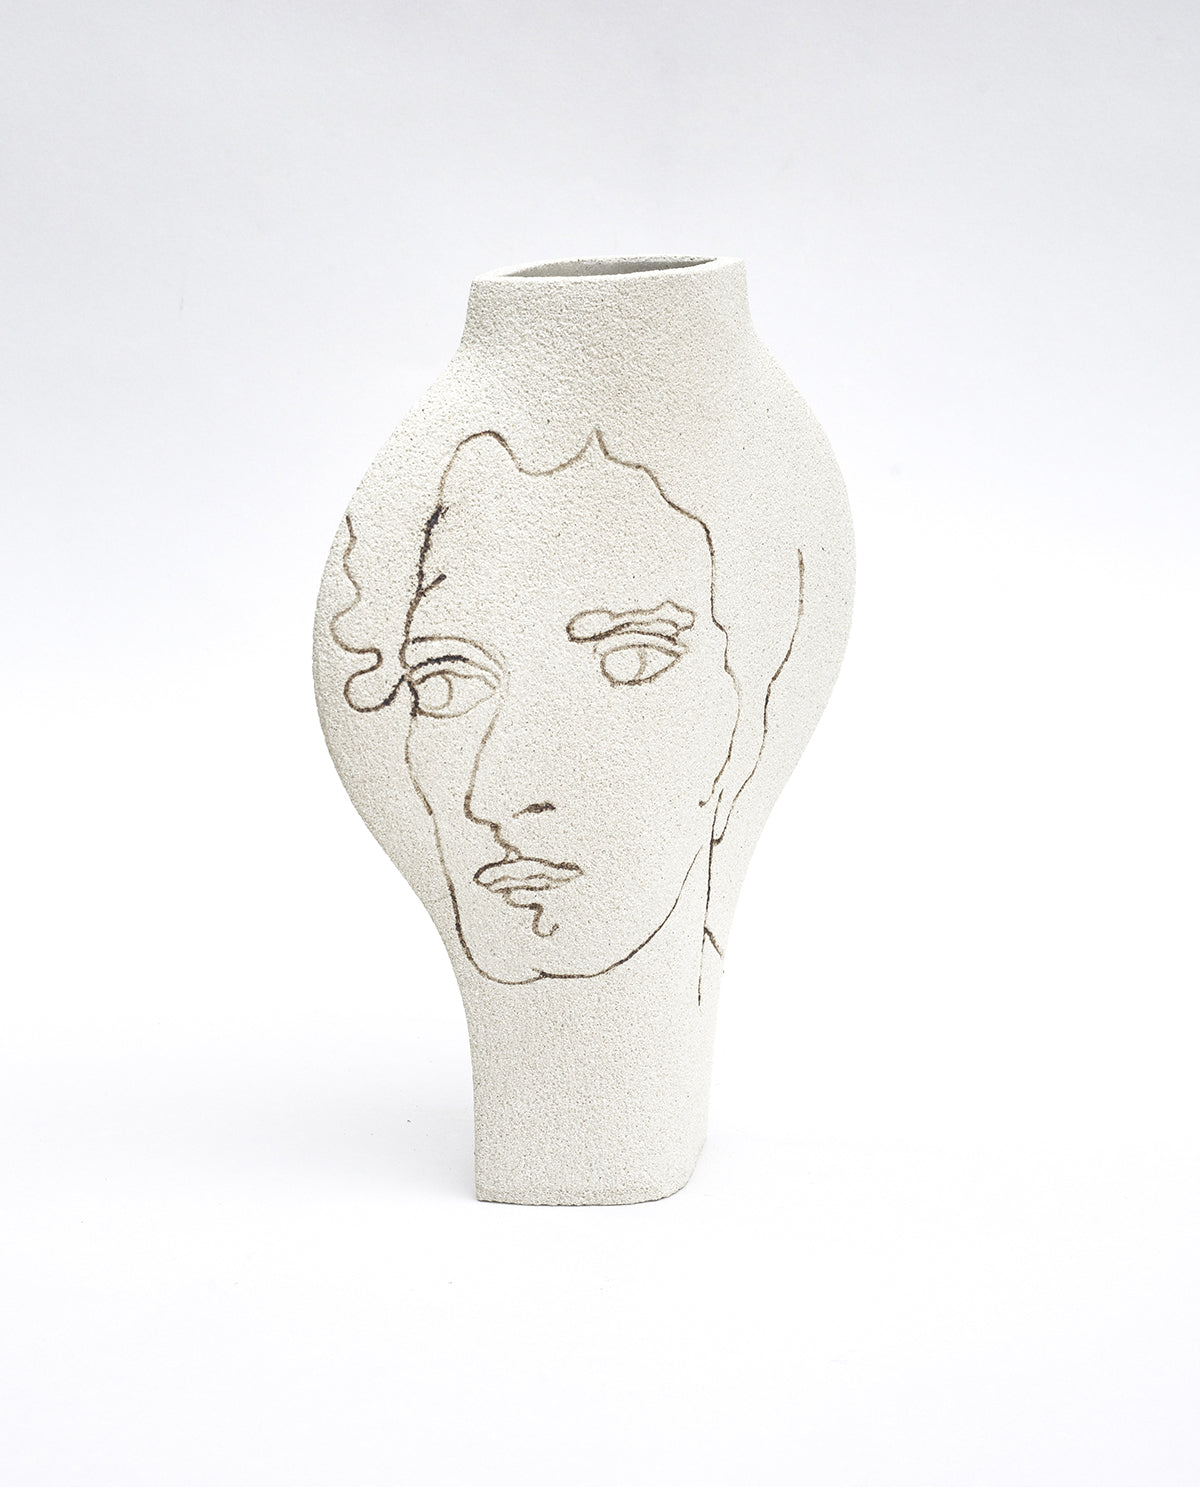 Hand-painted face vase by INI CERAMIQUE with carved portrait patterns and textured finish